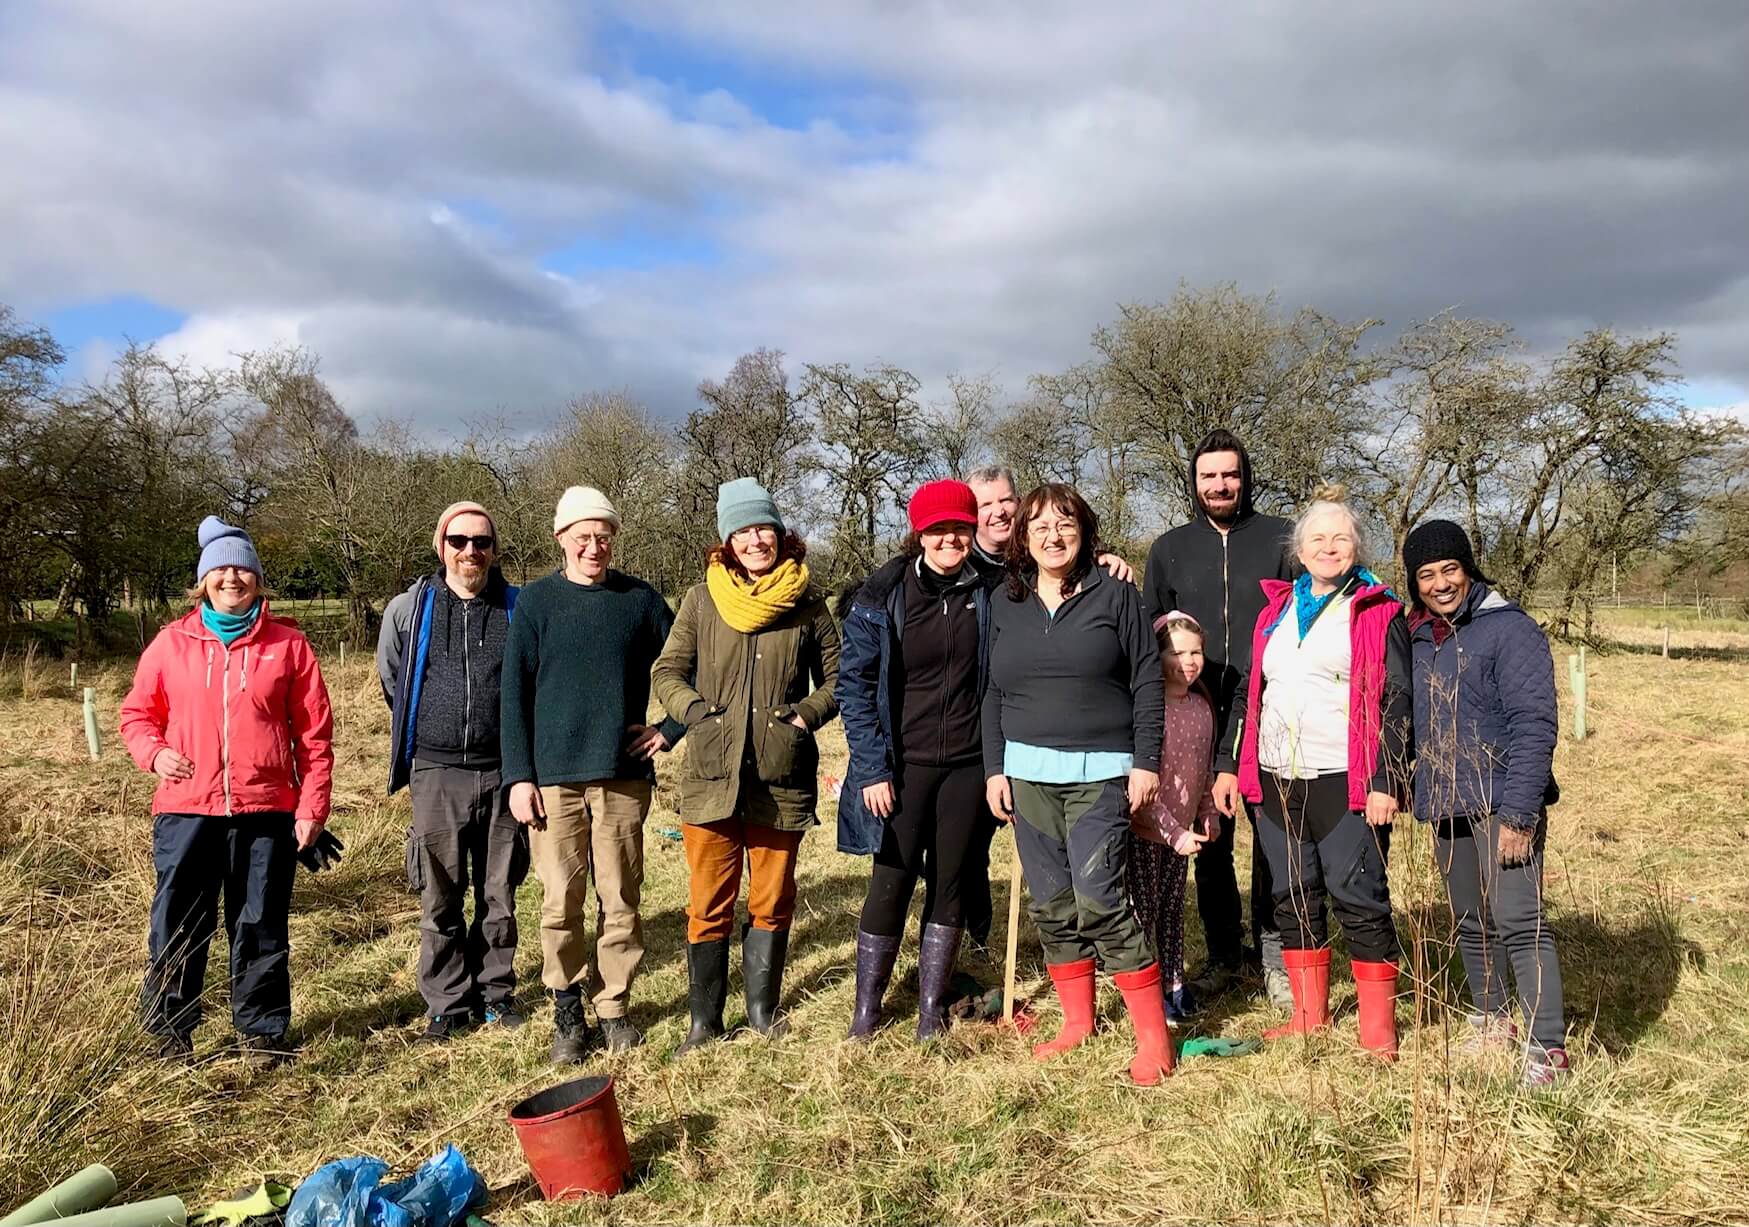 Happy group of volunteers in a sunny field. Some wearing wellies and some wearing winter hats